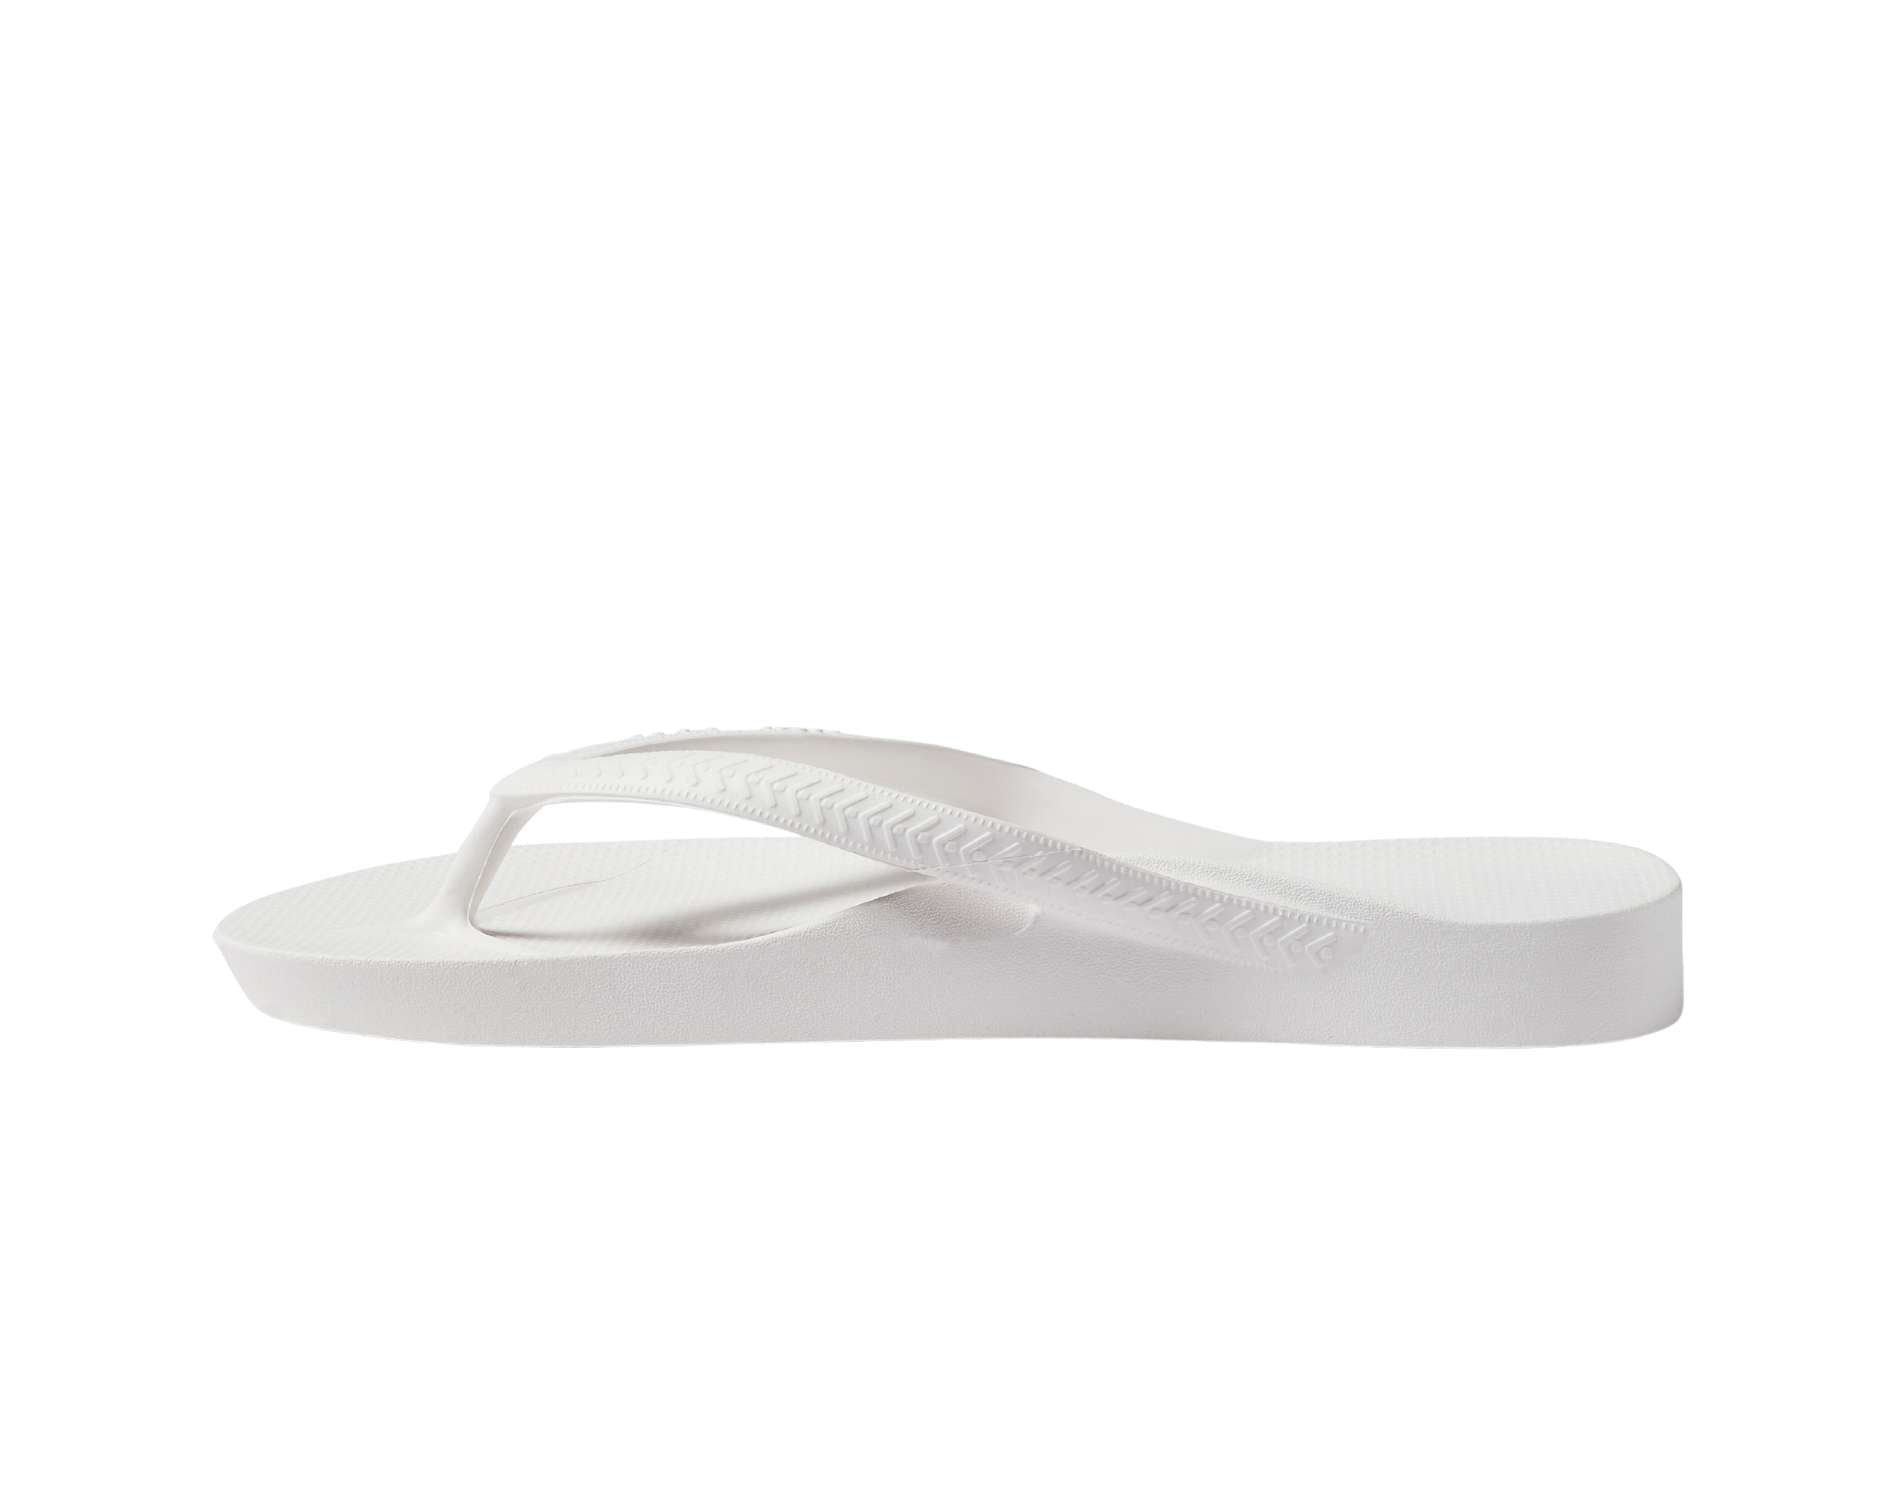 Archies arch support thongs in white colour